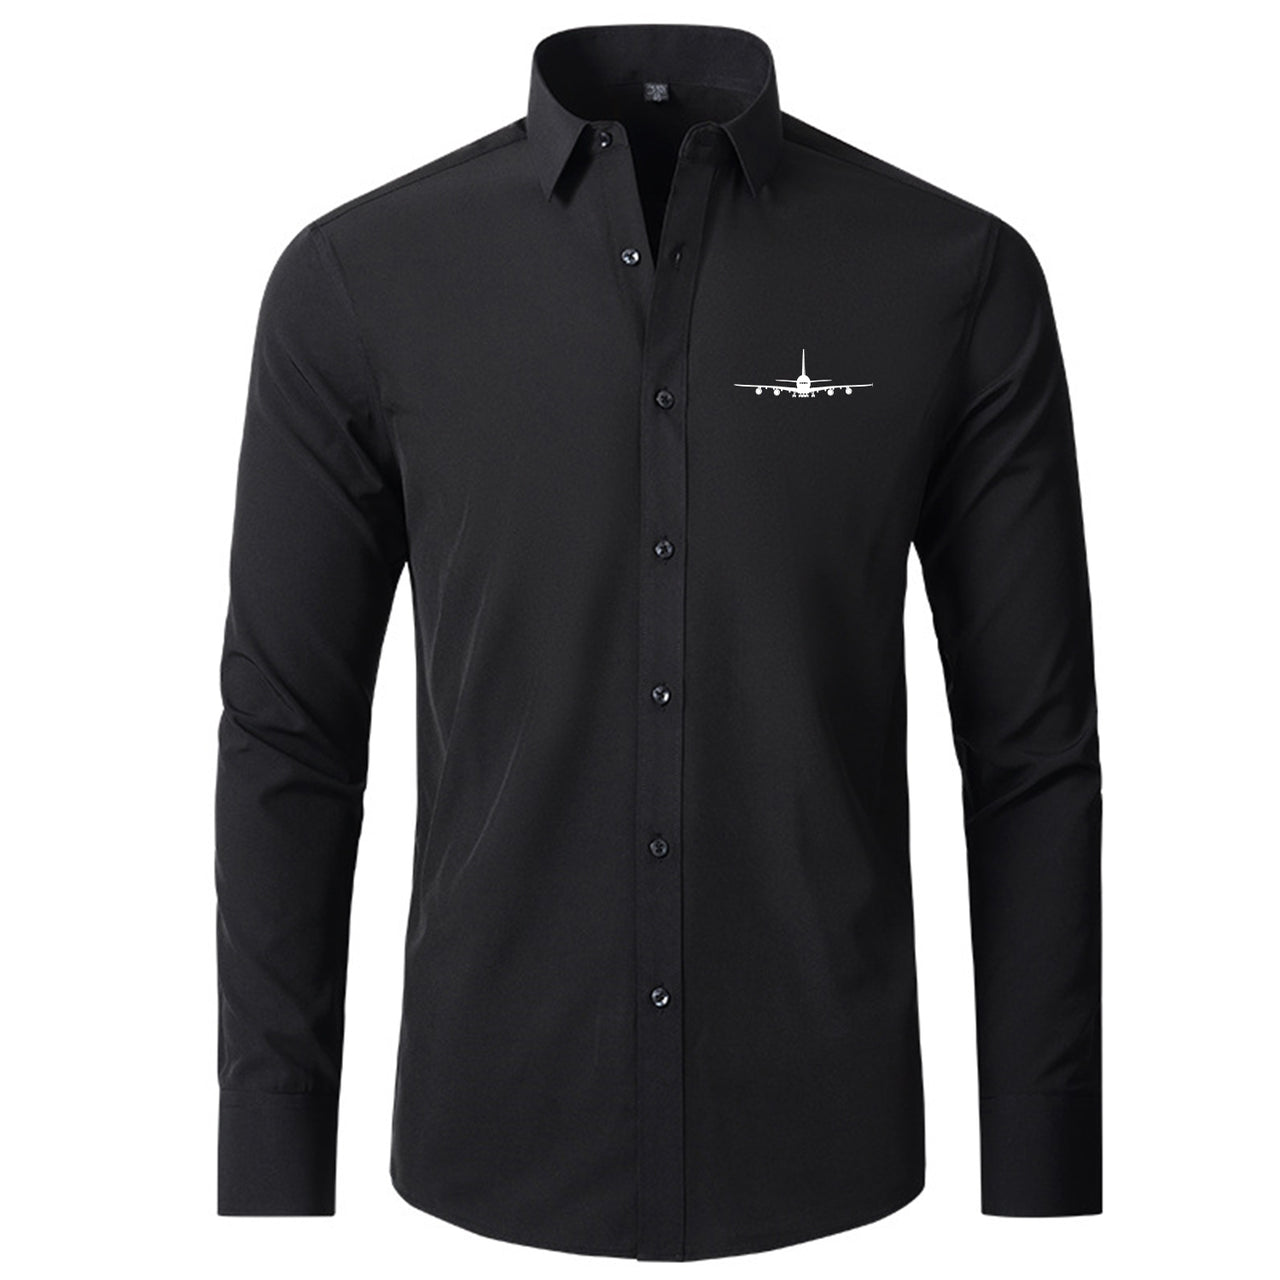 Airbus A380 Silhouette Designed Long Sleeve Shirts